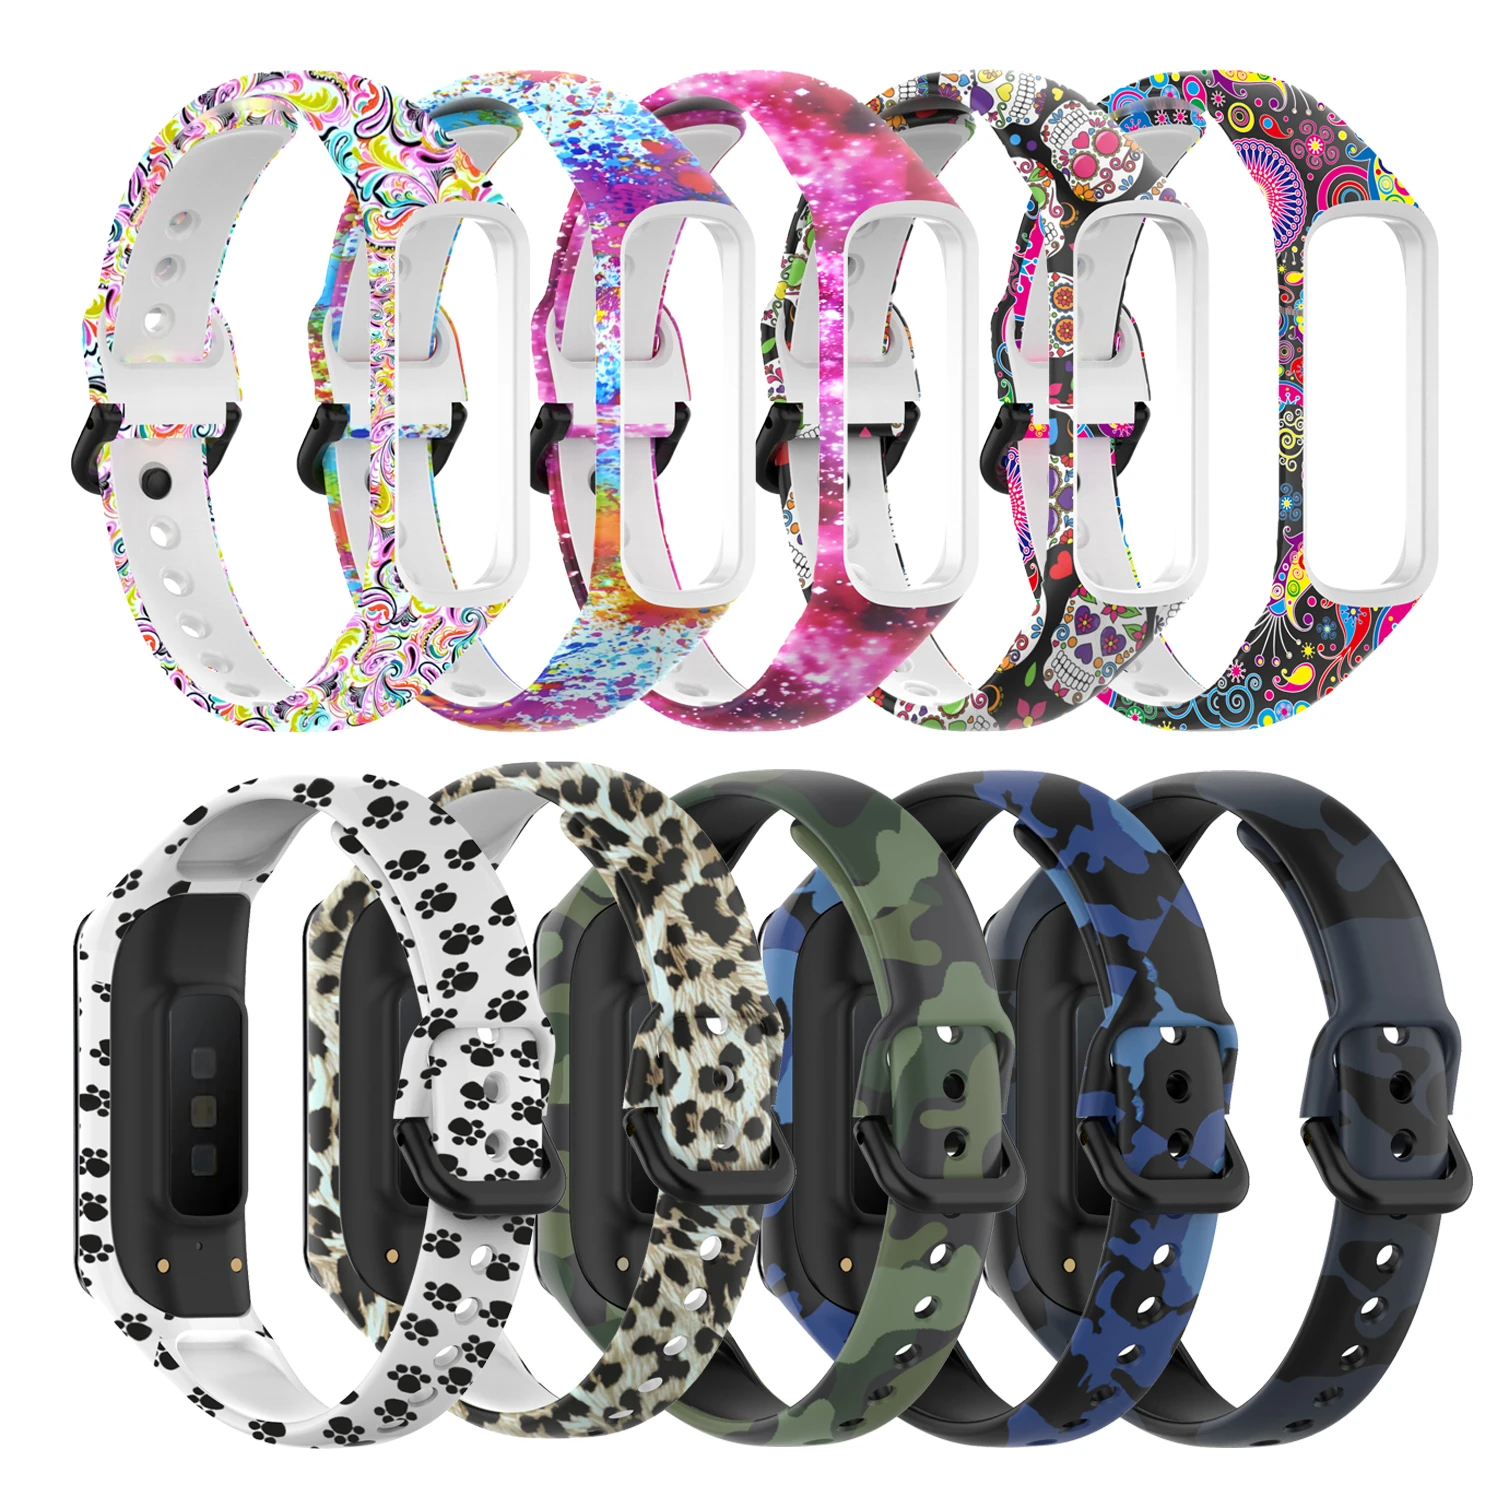 Silicone Sport Band Strap For Samsung Galaxy Fit 2 SM-R220 Watch Bracelet Replacement Watchband Colorful For Samsung Galaxy Fit2